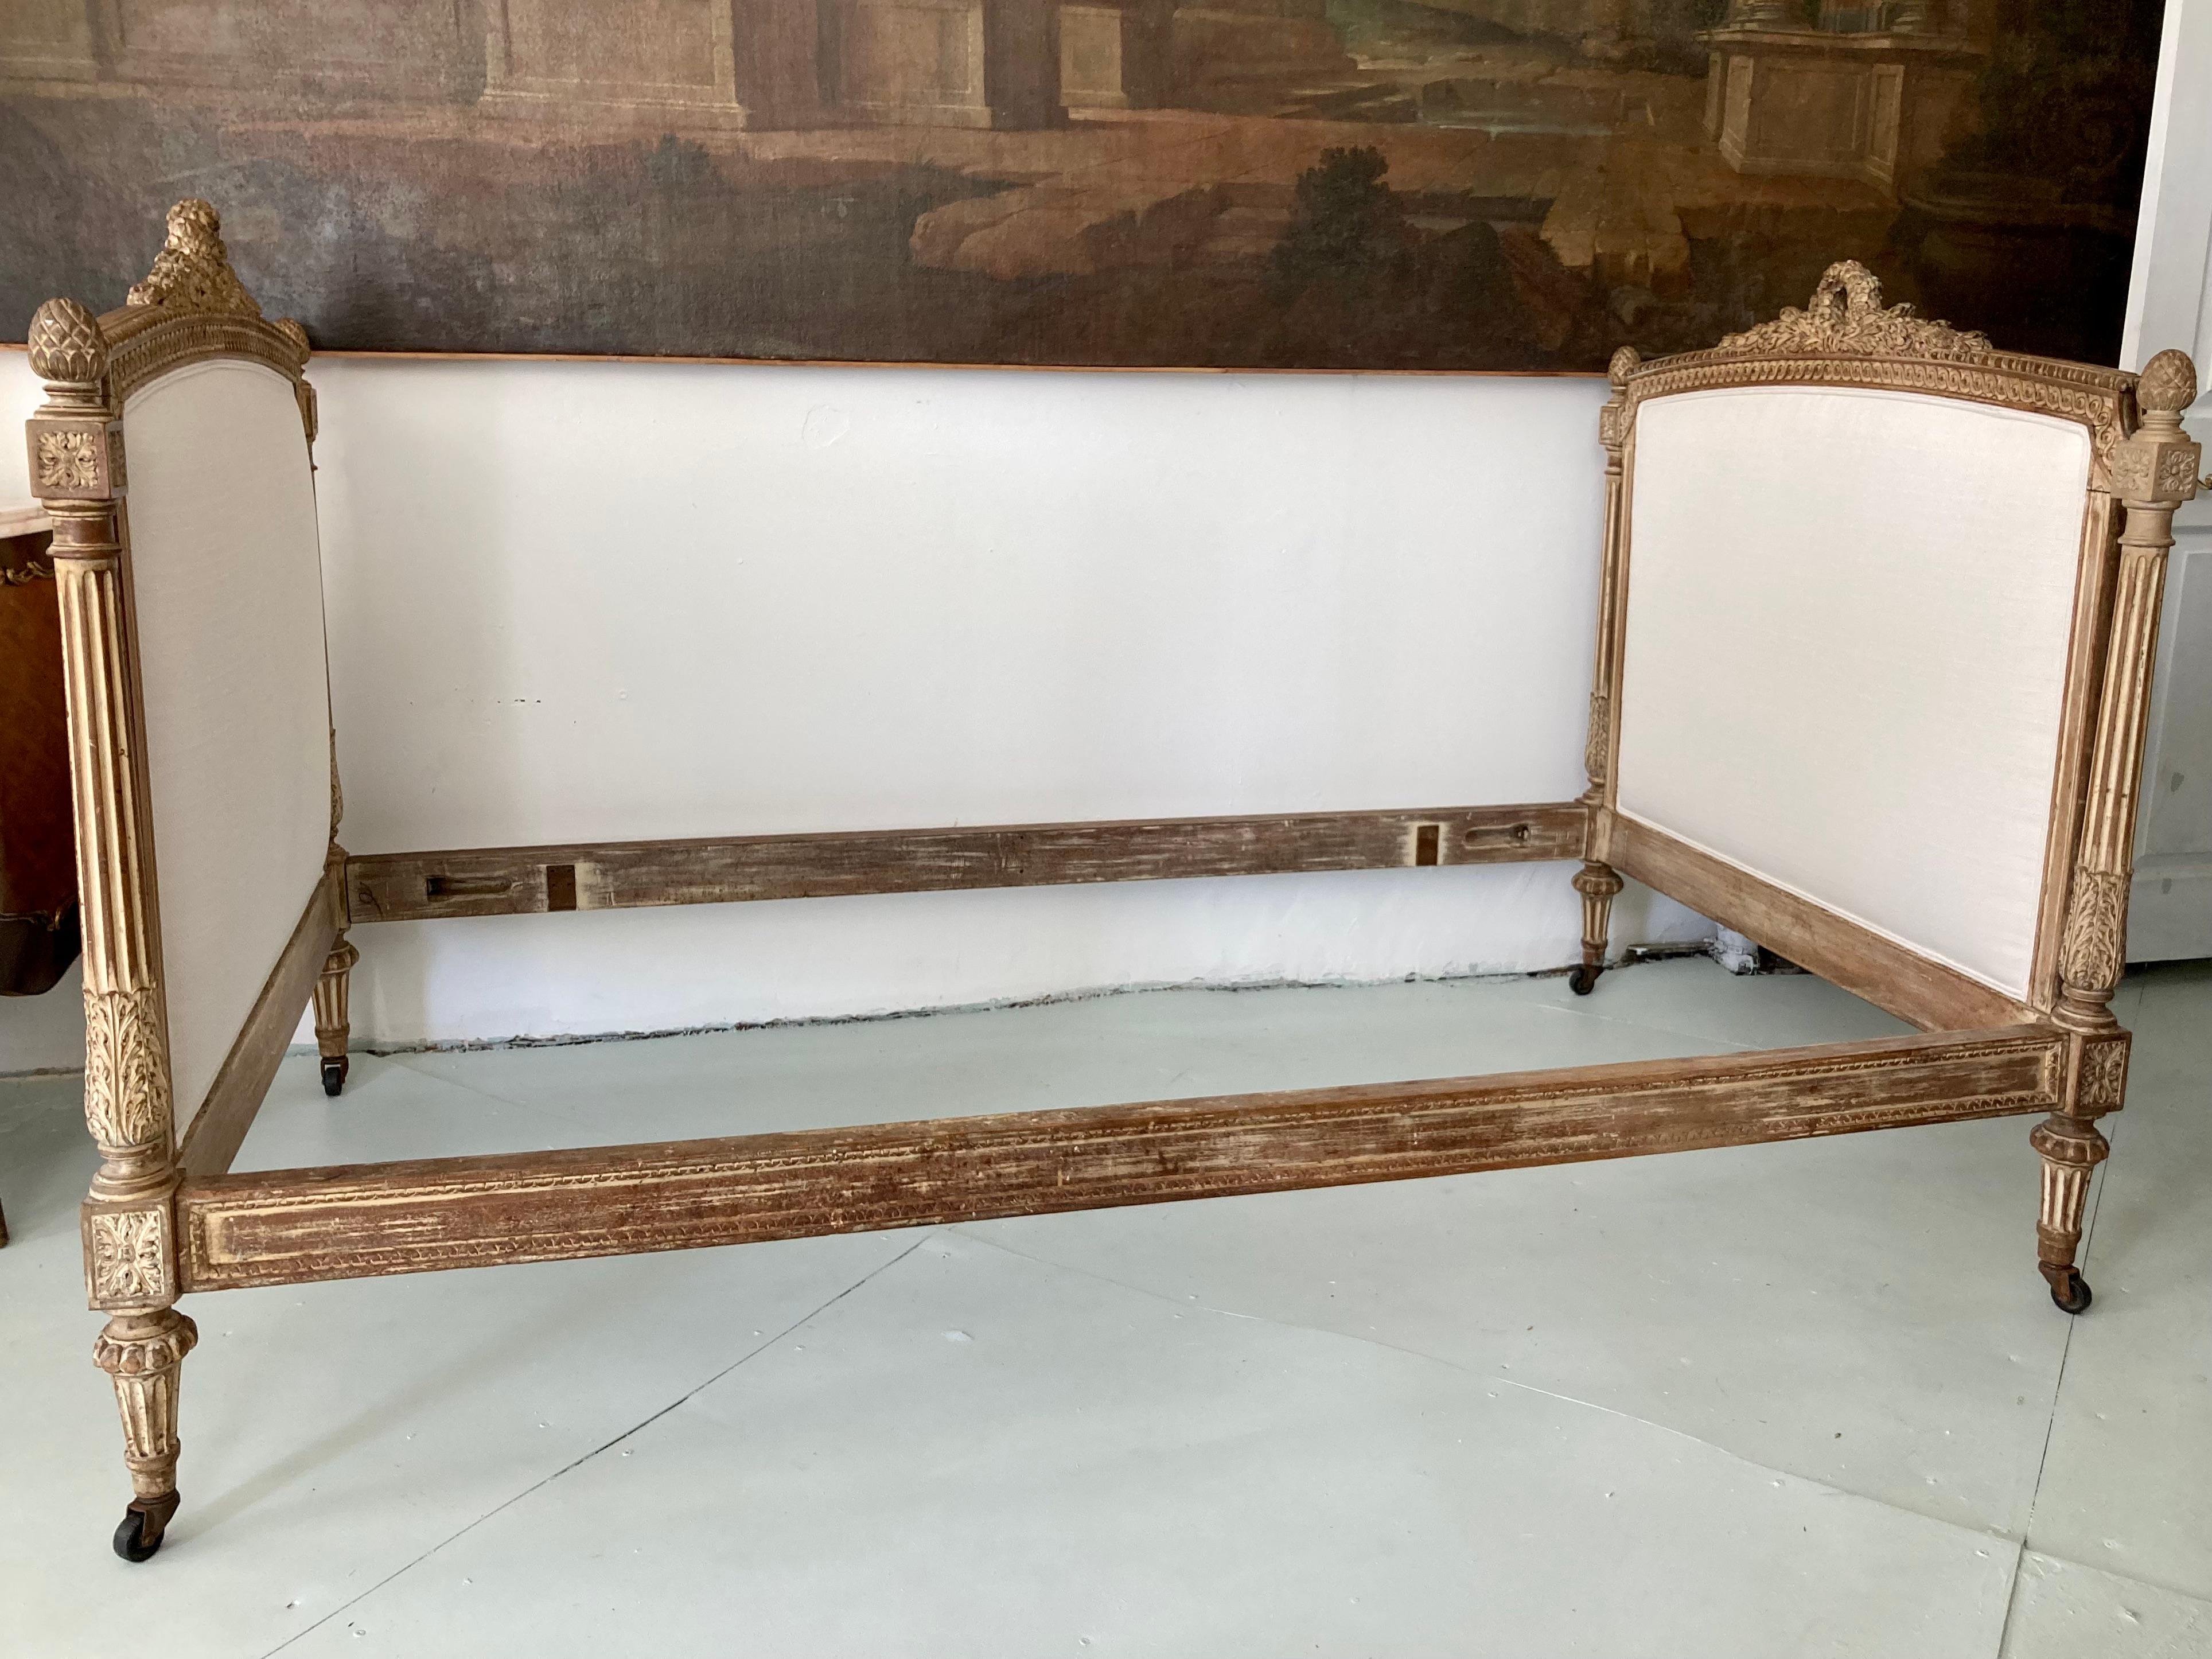 Fabulous French Louis XVI daybed. Original finish with new Todd Hase Upholstery that is upholstered in Todd Hase Textiles High Performance Off White. This frame accommodates a twin size mattress and spring. Add some French architecture to your